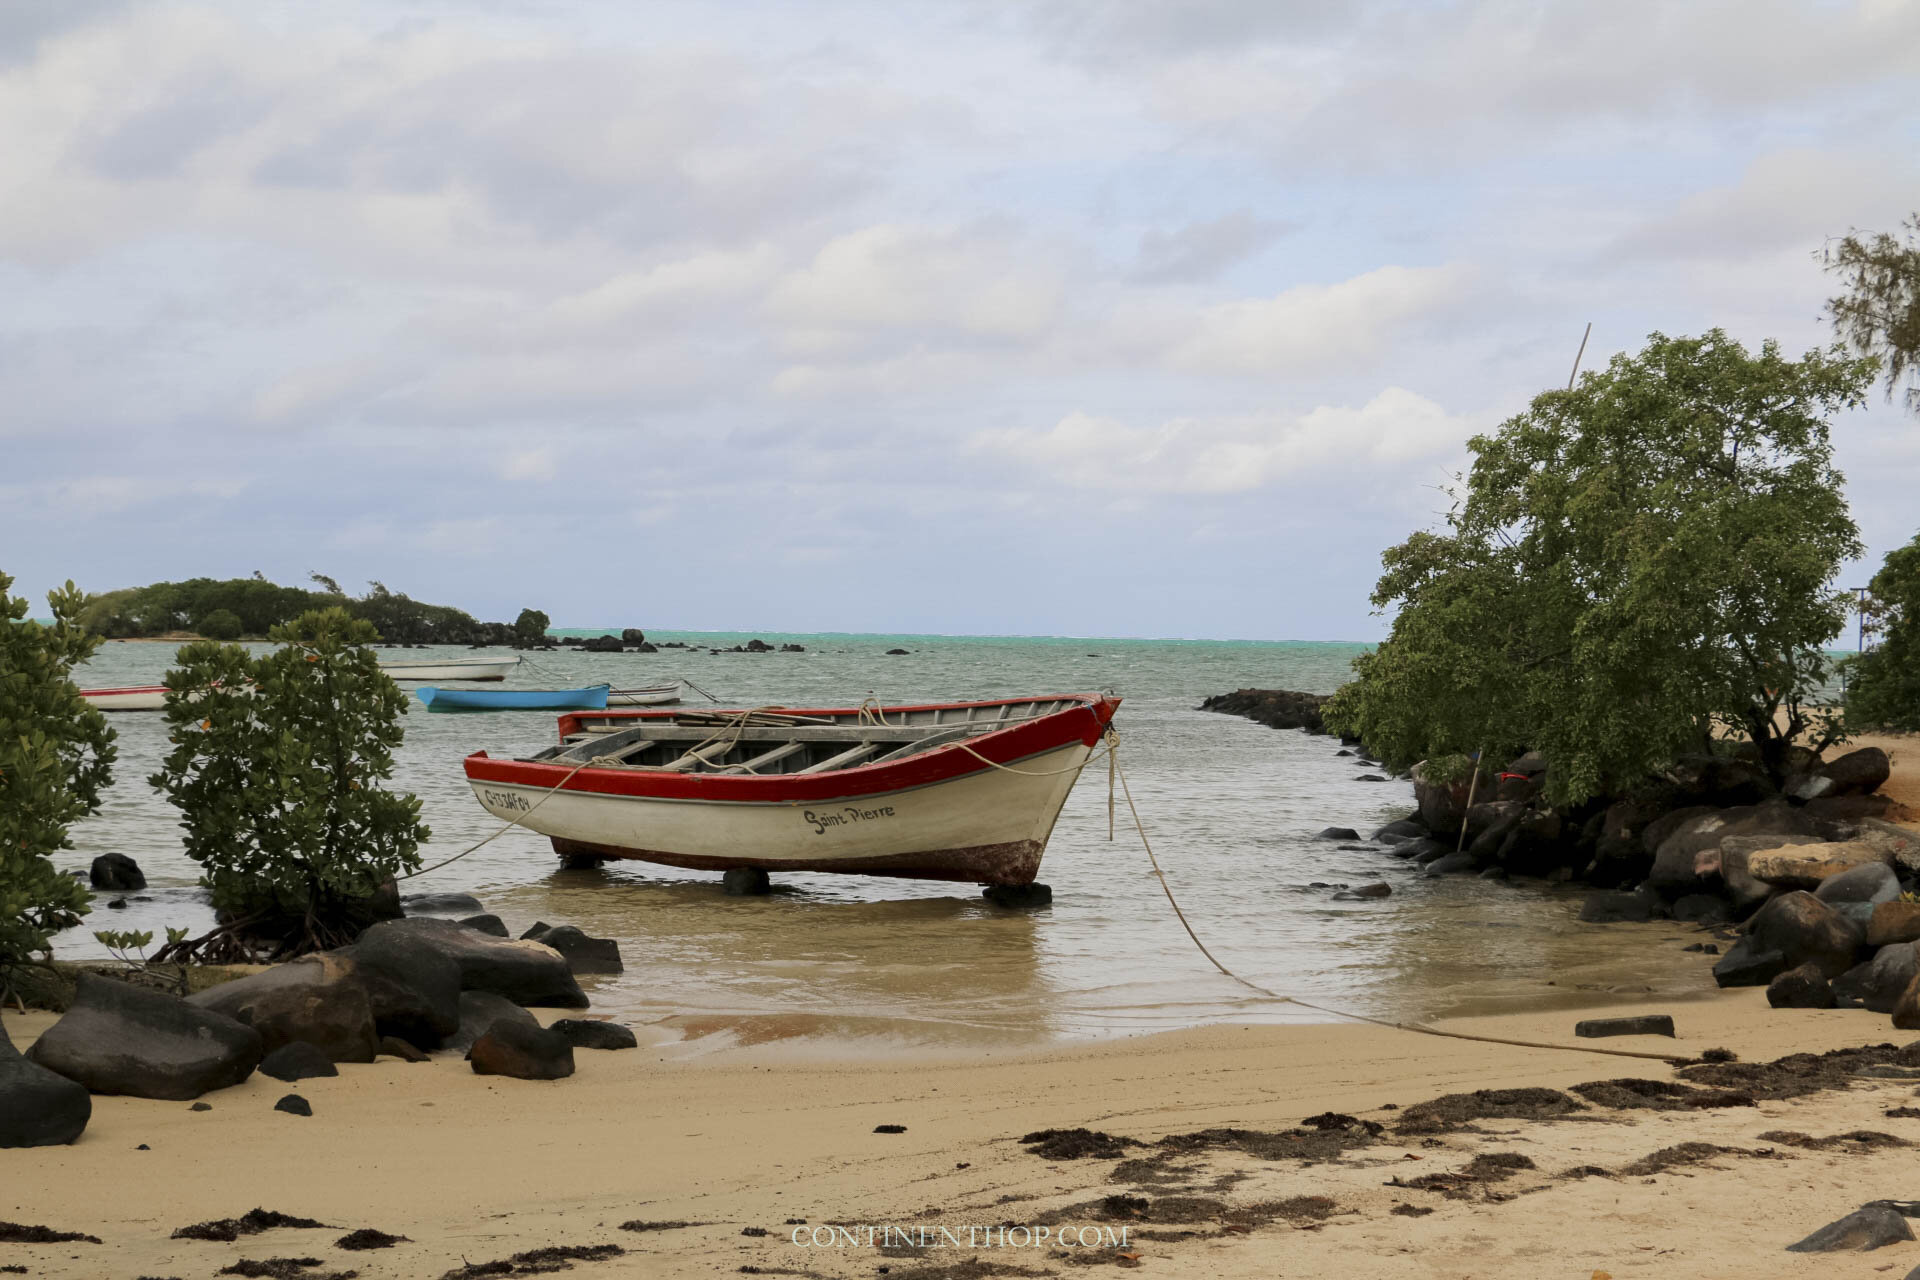 A boat moored by the beach in Mauritius